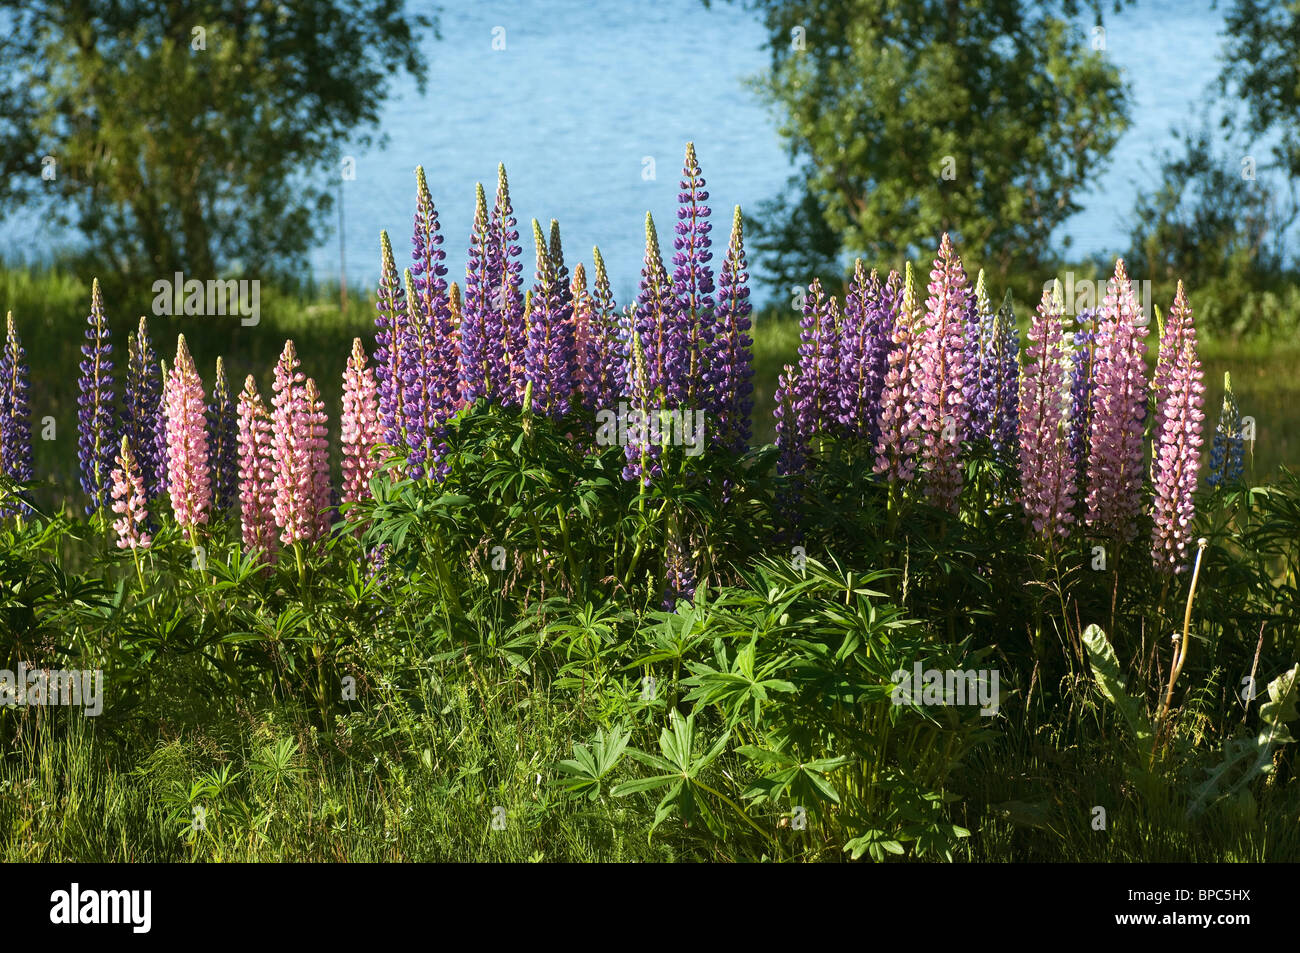 Garden Lupin (Lupinus polyphyllus), flowering stand in Sweden. Stock Photo